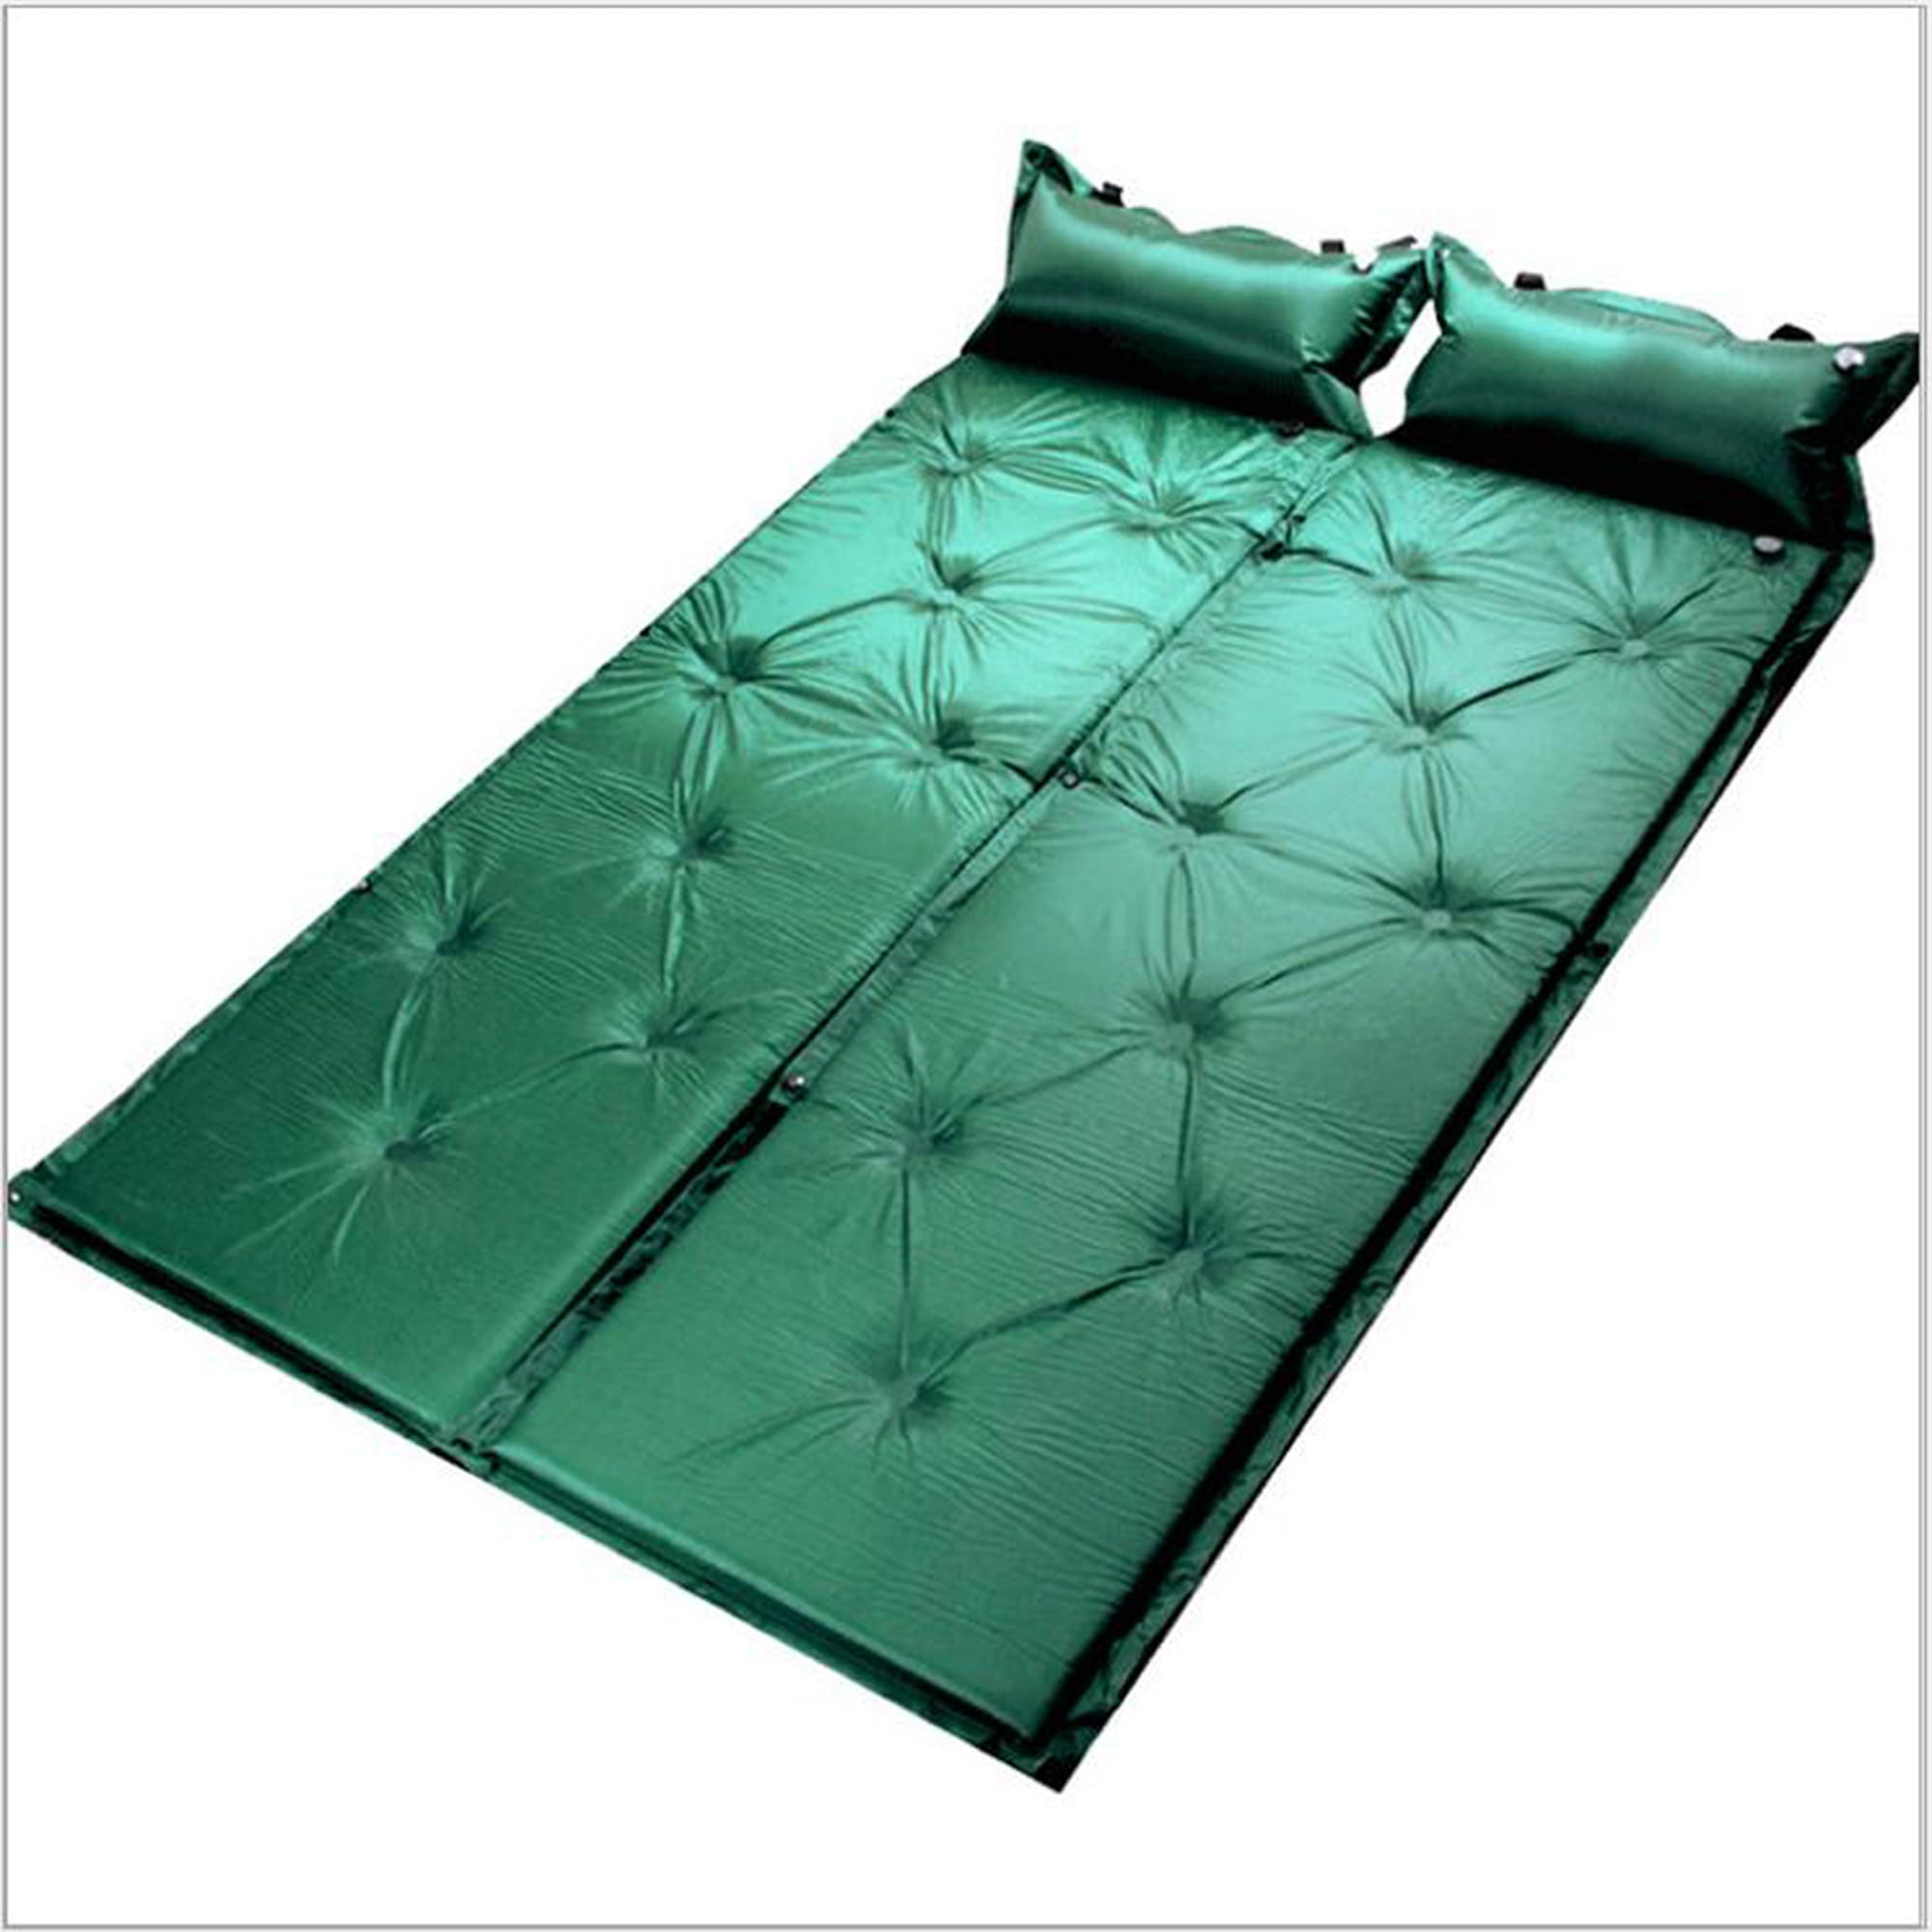 Self Inflating Sleeping Pad with Free Bonus Camping Pillow Comfortable and Well Insulated Yet Compact When Folded The Foam Camping Mattress is Large Ryno Tuff Sleeping Pad Set